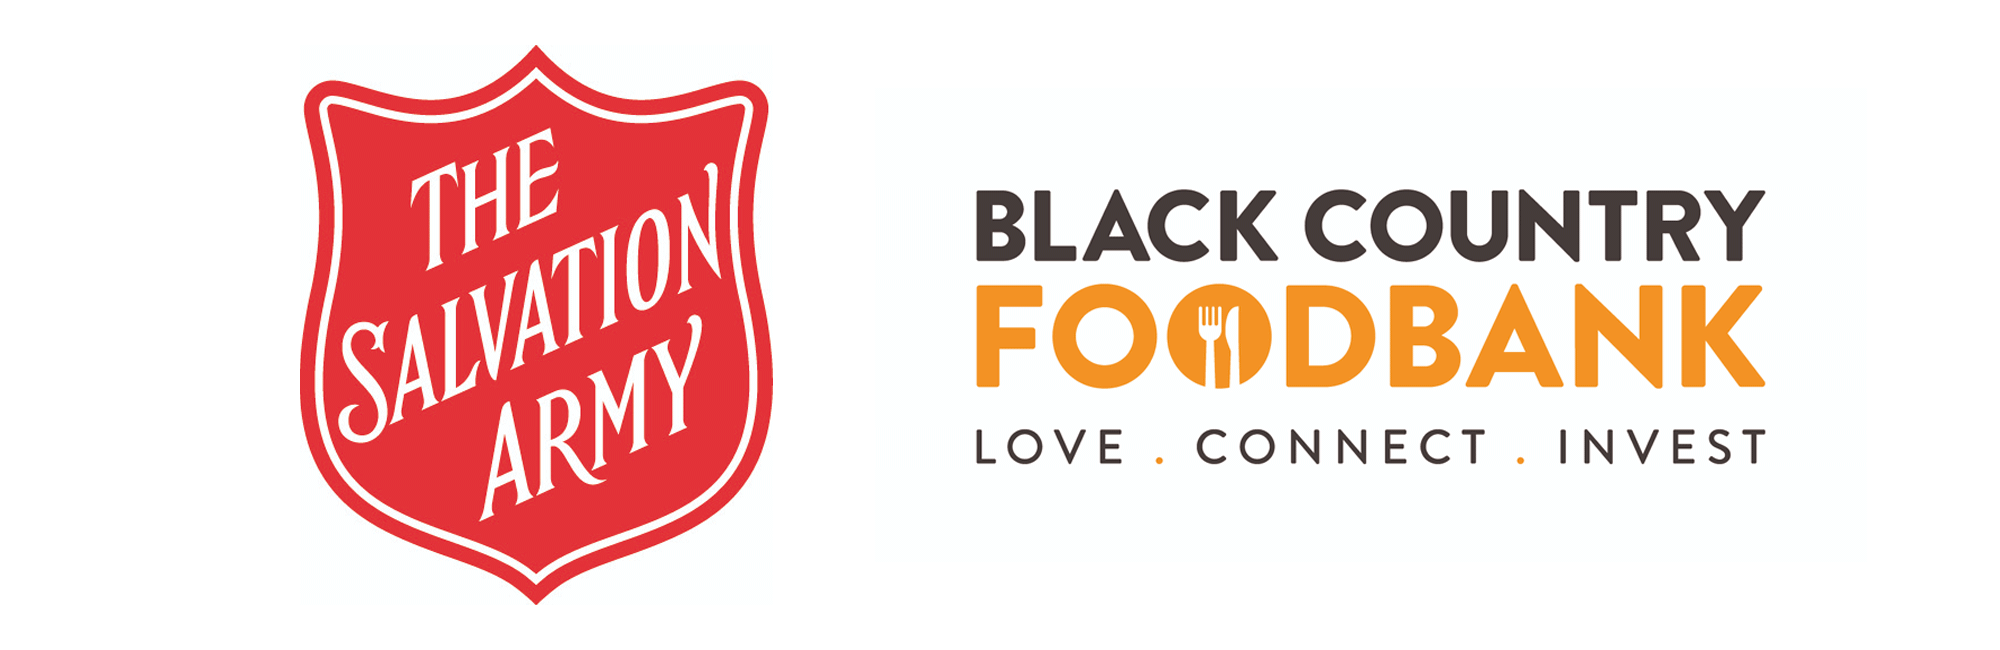 Salvation Army and Black Country Foodbank logos